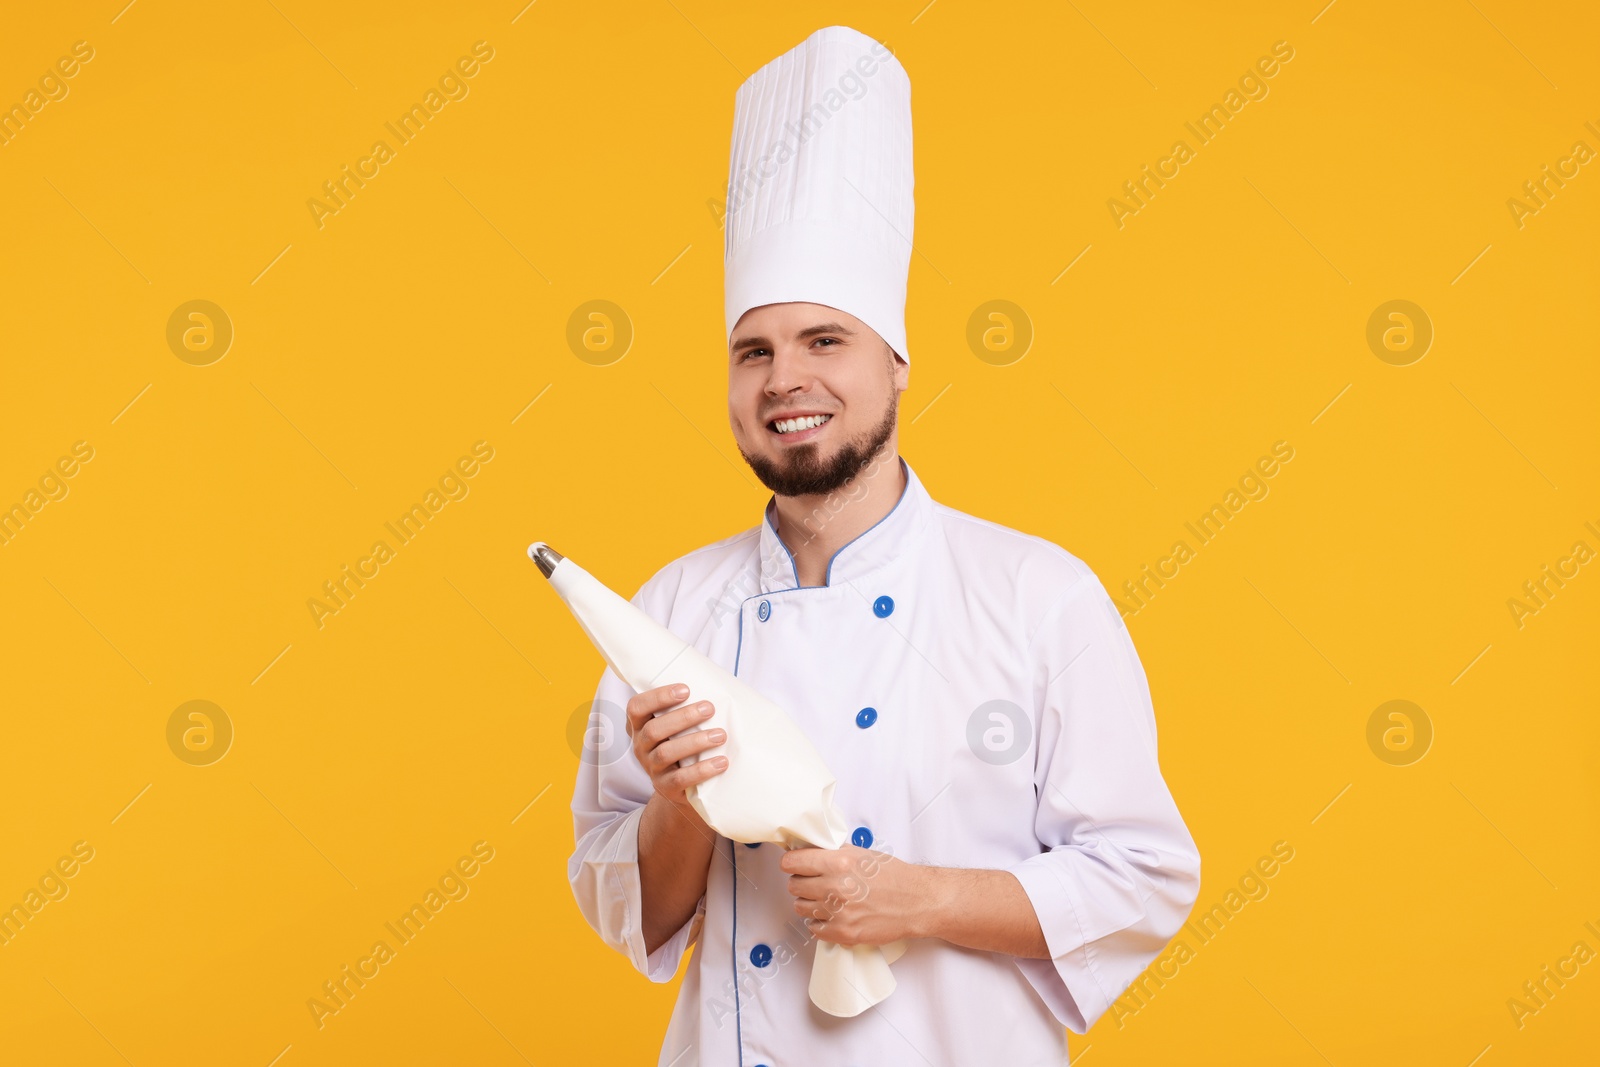 Photo of Happy professional confectioner in uniform holding piping bag on yellow background